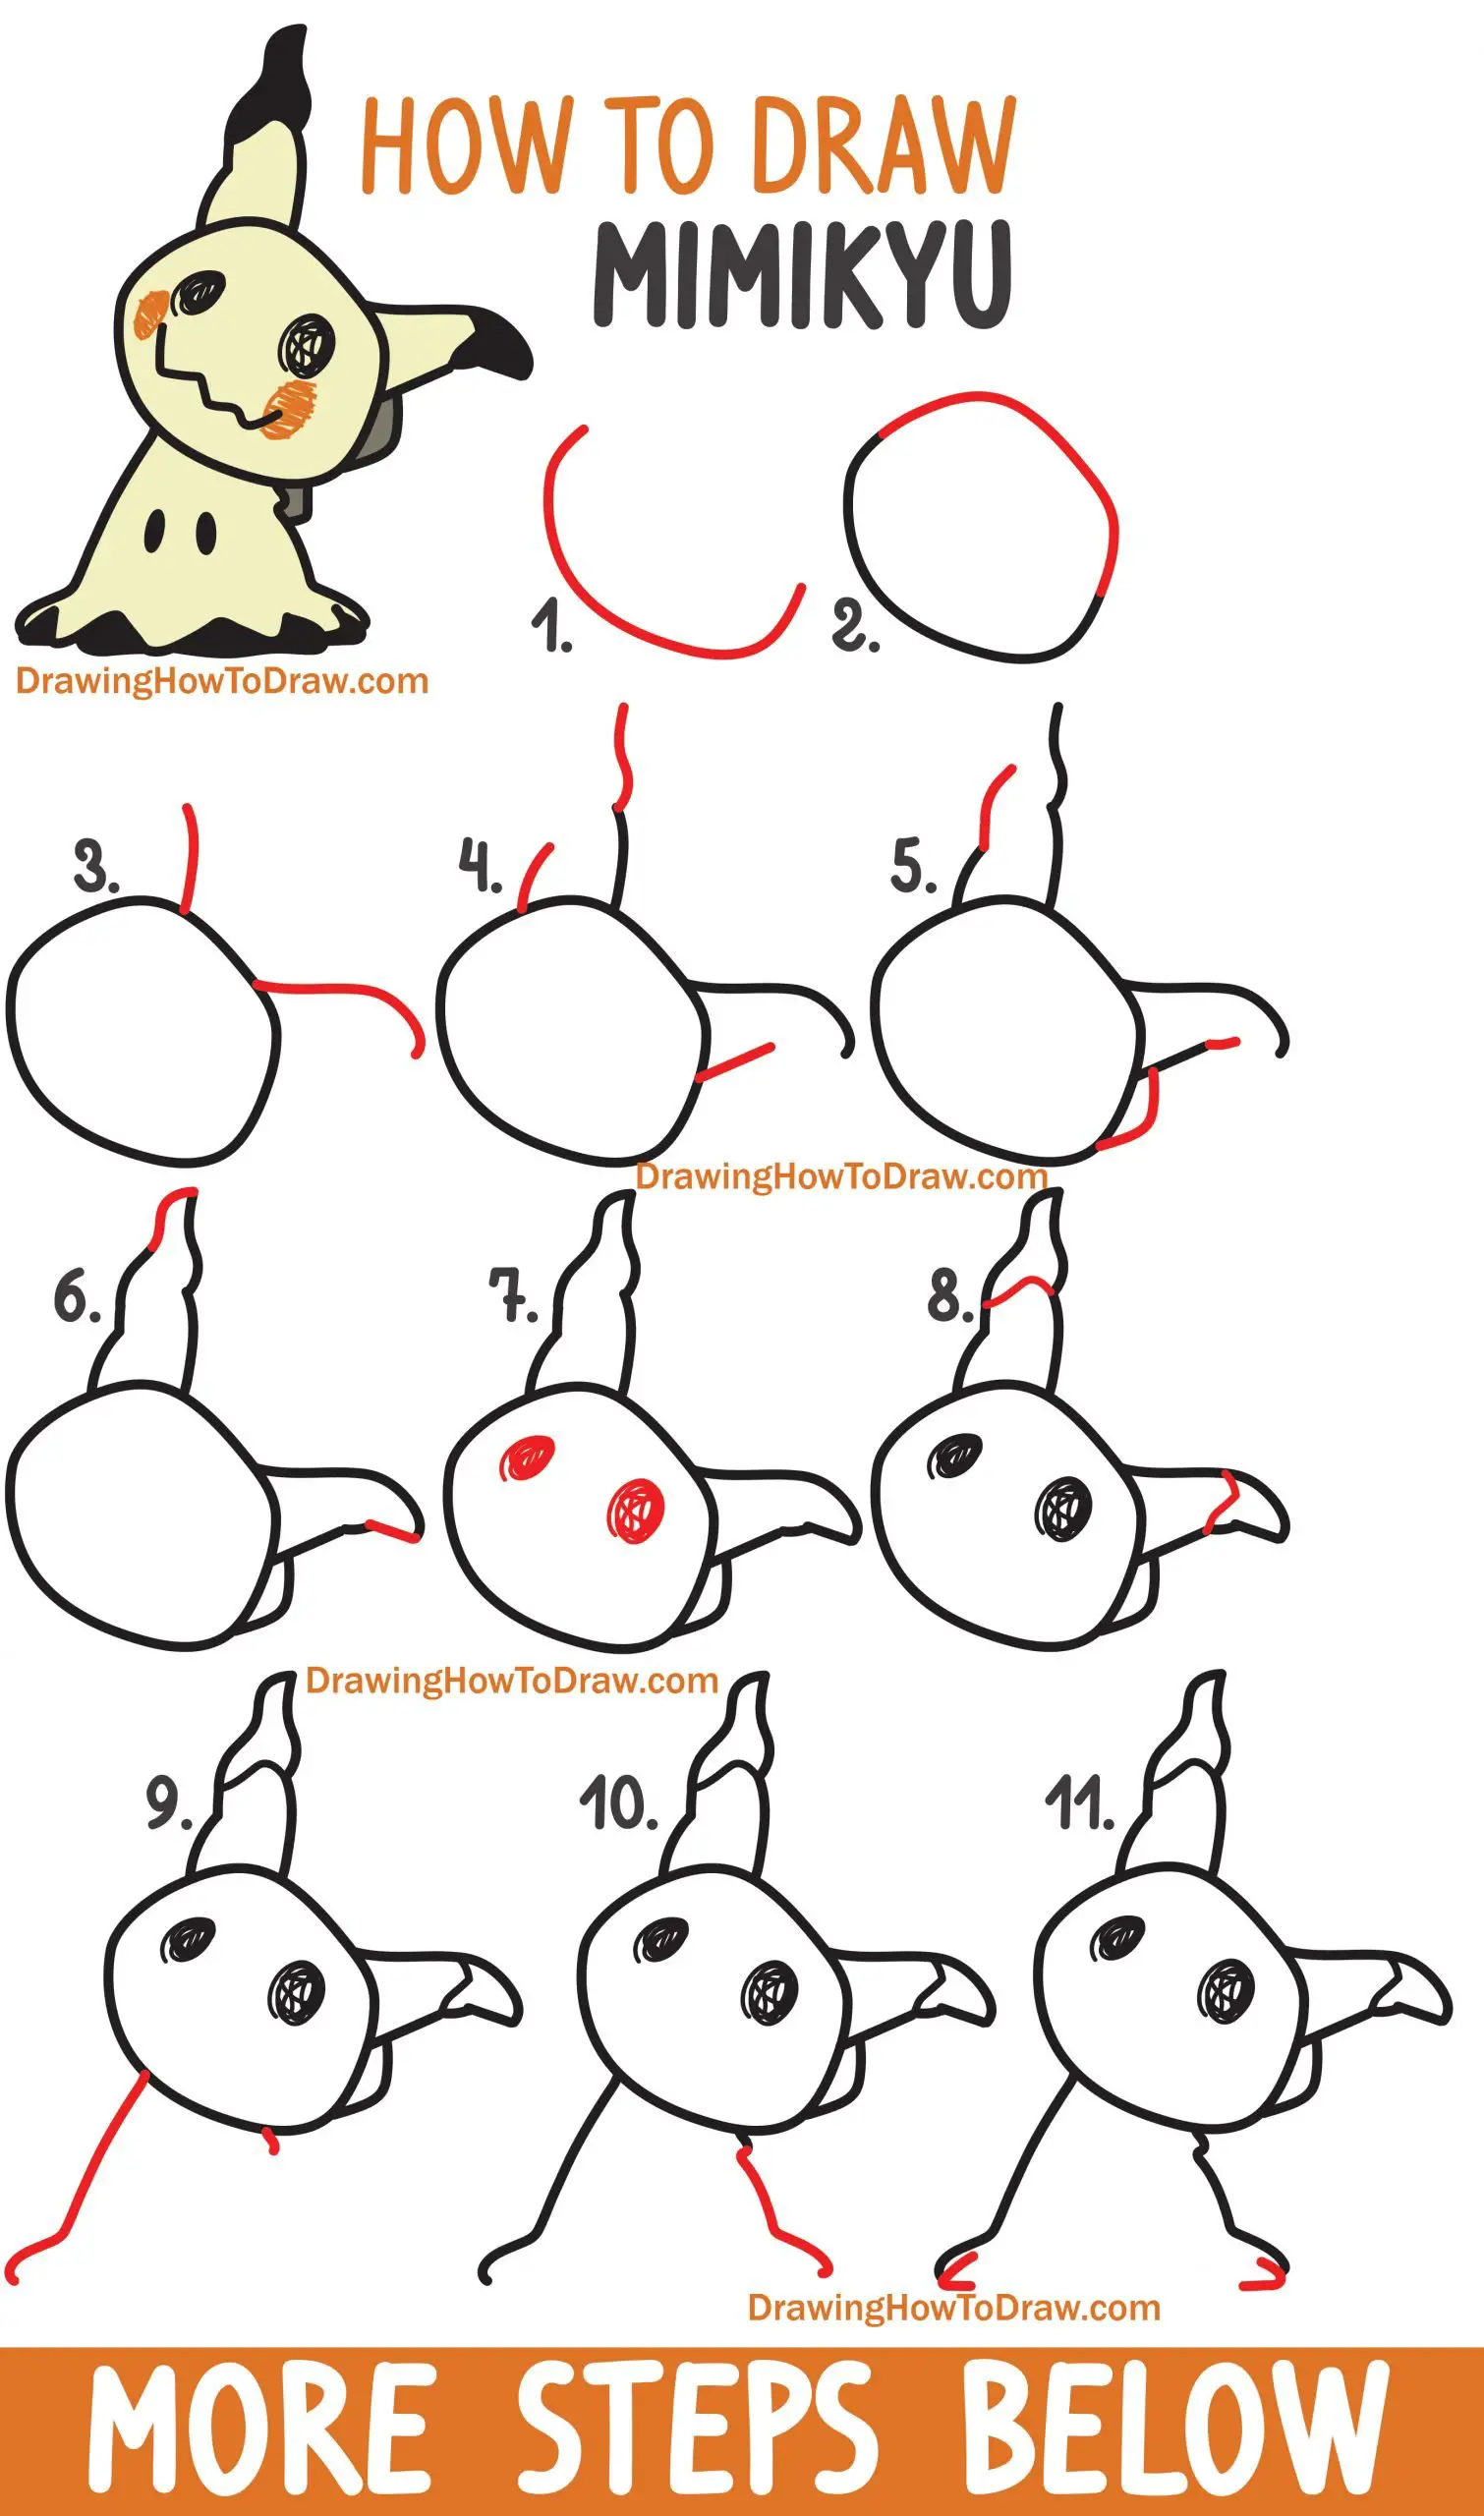 How to Draw Mimikyu from Pokemon Easy Step by Step Drawing ...